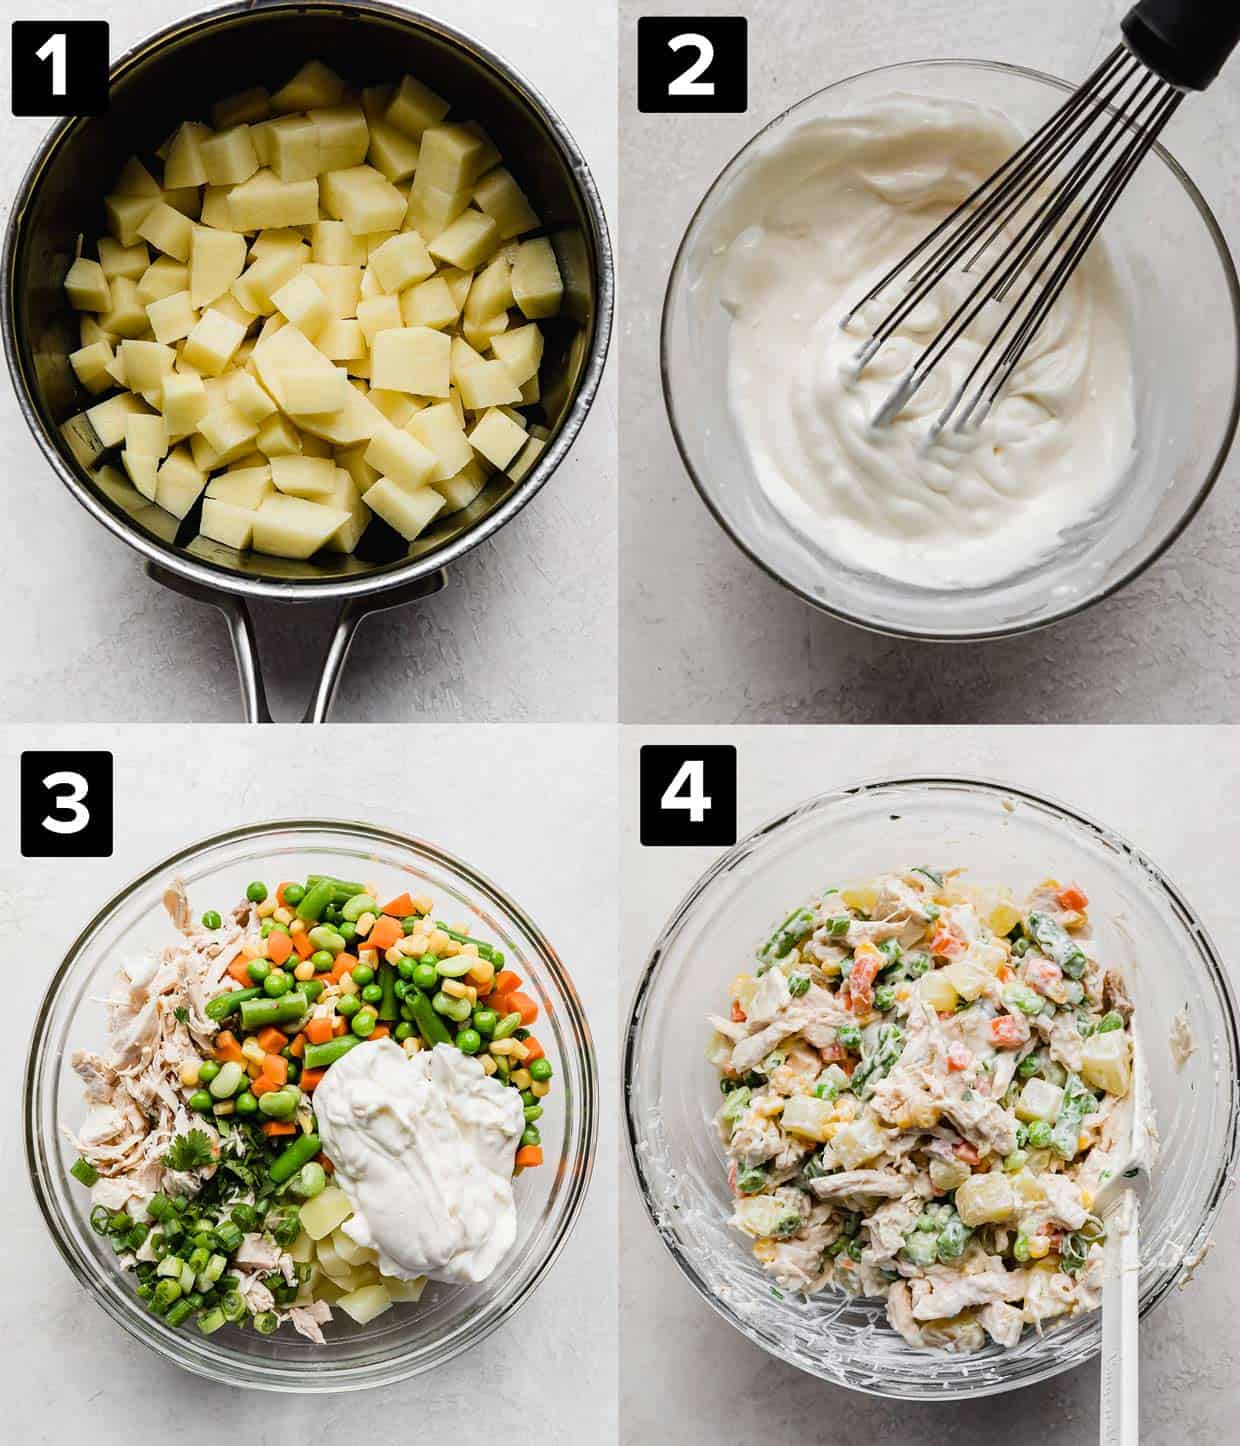 A four photo collage showing how to make Mexican chicken salad tostadas: diced potatoes in a black pot, mayo mixture in a glass bowl, Mexican chicken salad before storing, and then after stirring.